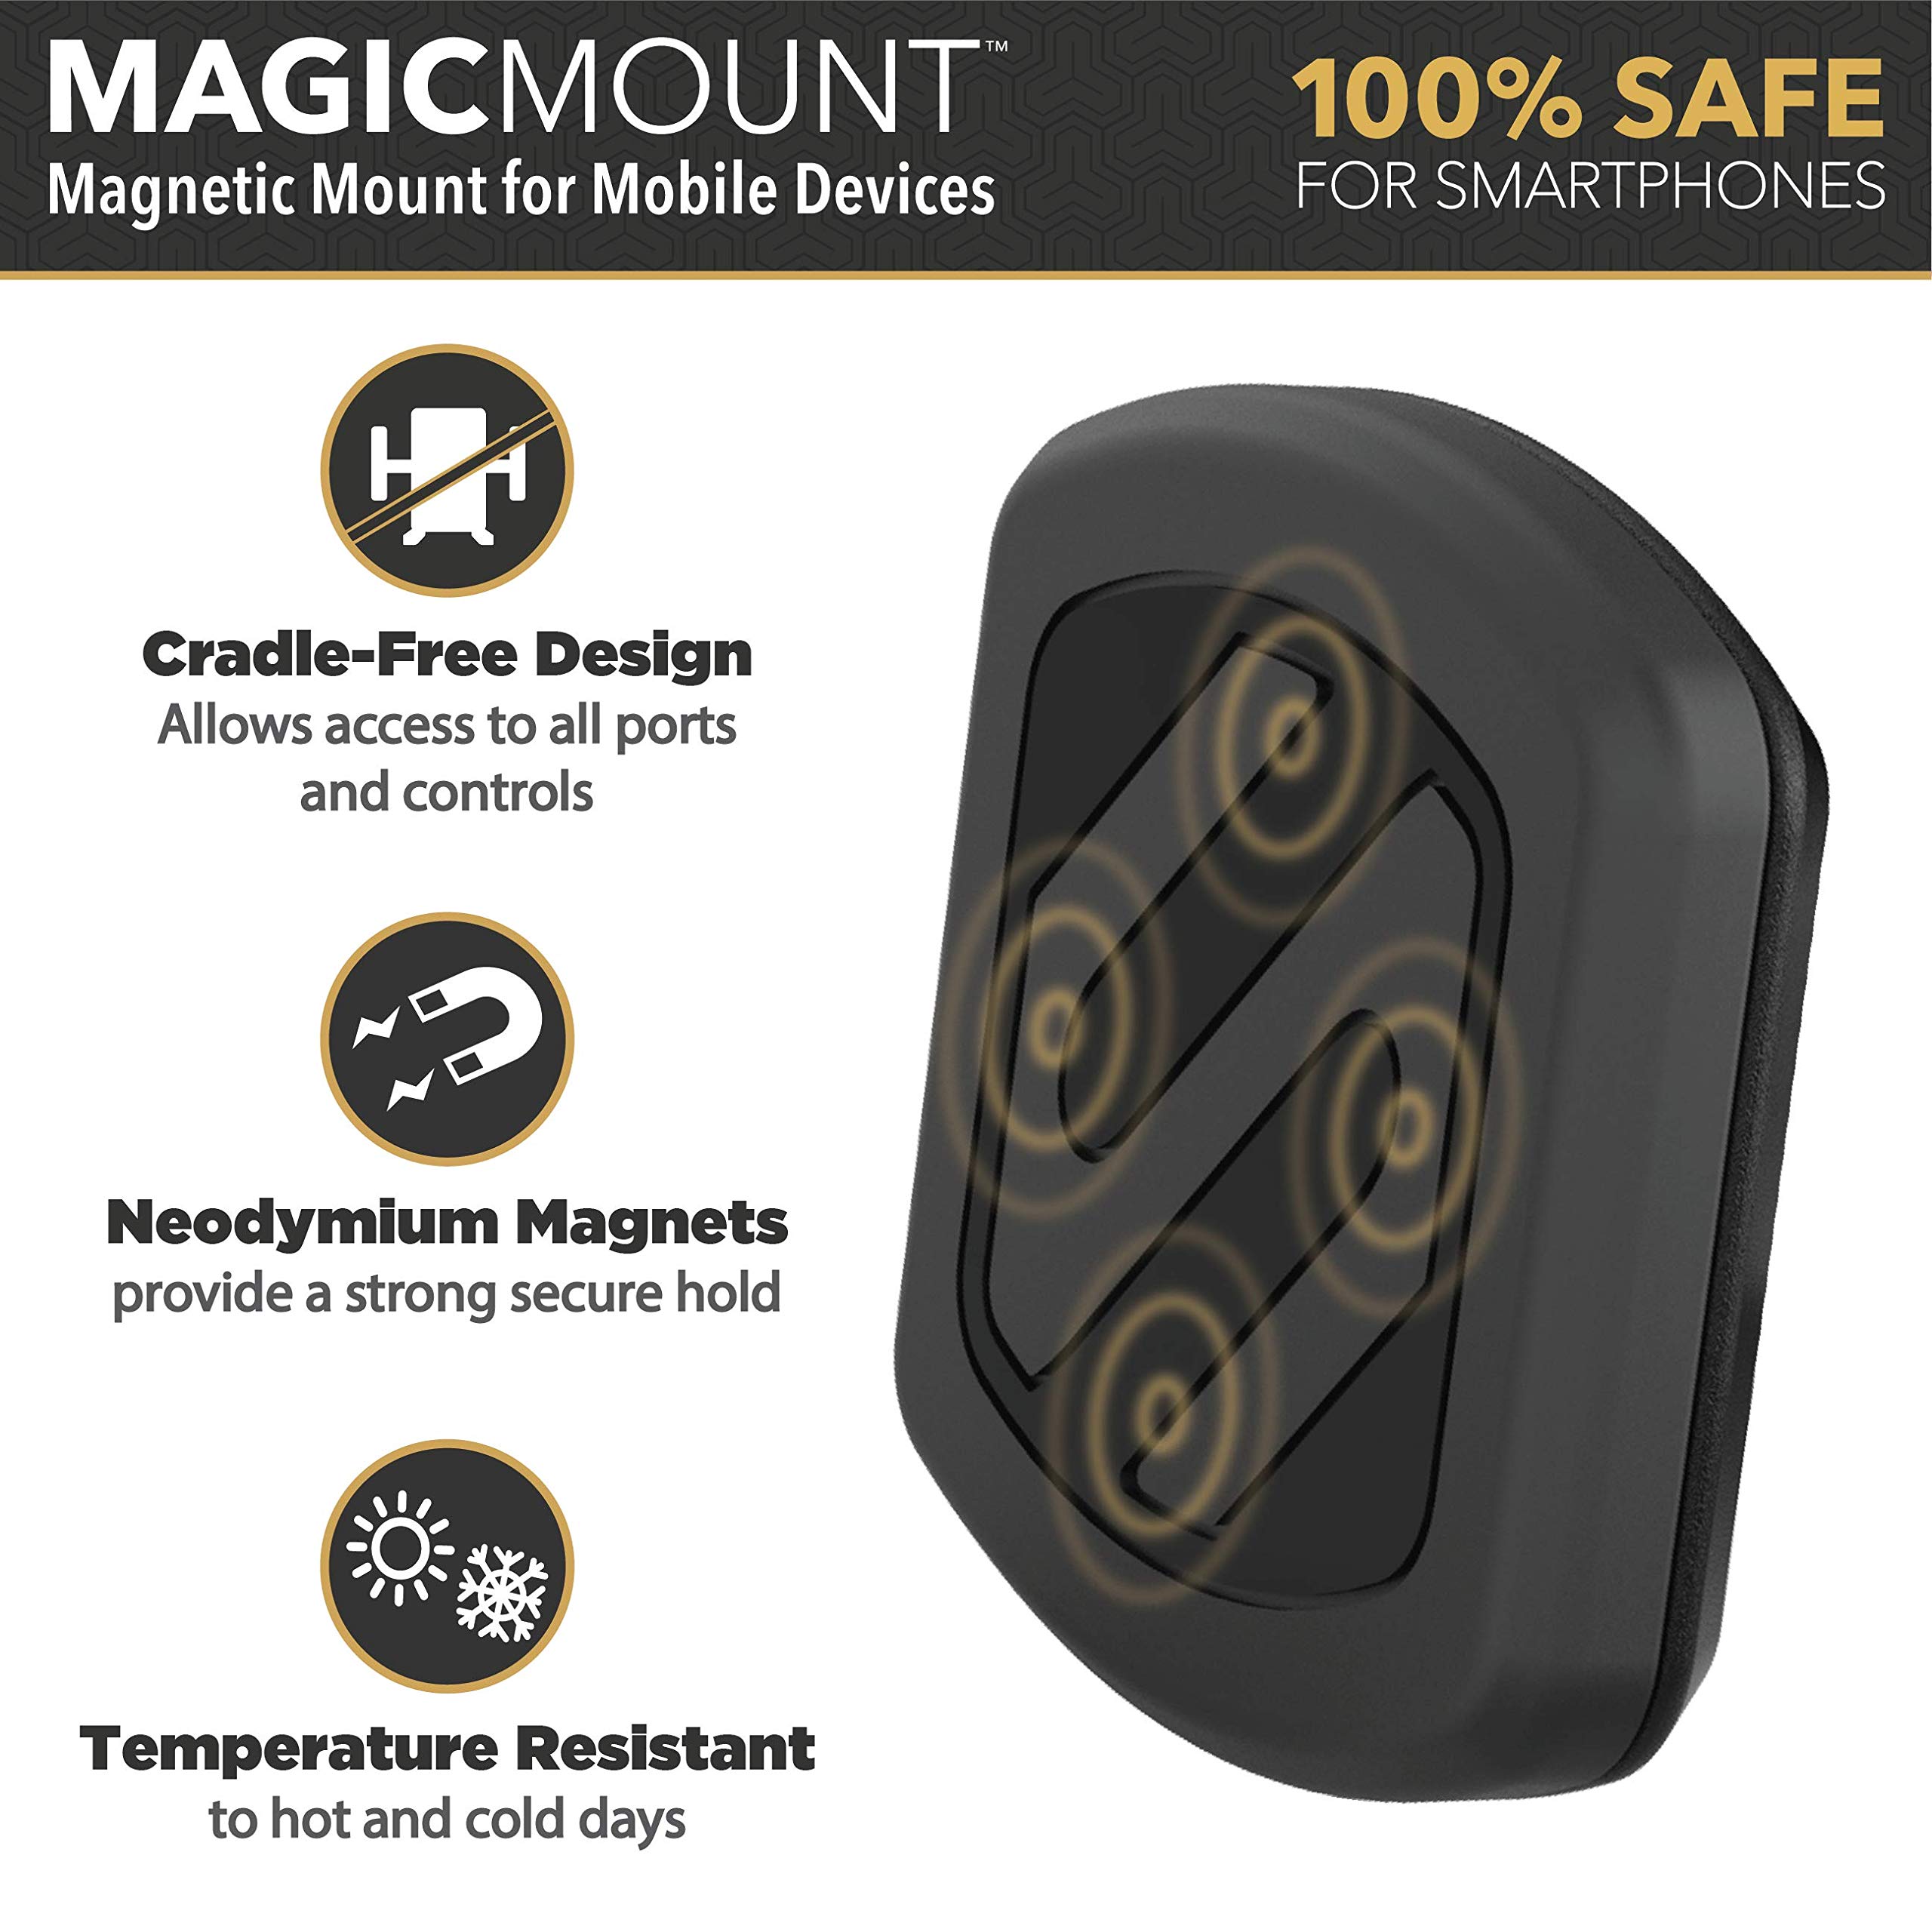 Scosche MAGWSM-10PKFLT MagicMount Magnetic Suction Cup Phone Mount for Car Dashboard or Windshield, 360° Adjustable Magnet Head, Universal Cell Phone Holder for iPhone, Samsung & More (Pack of 10)